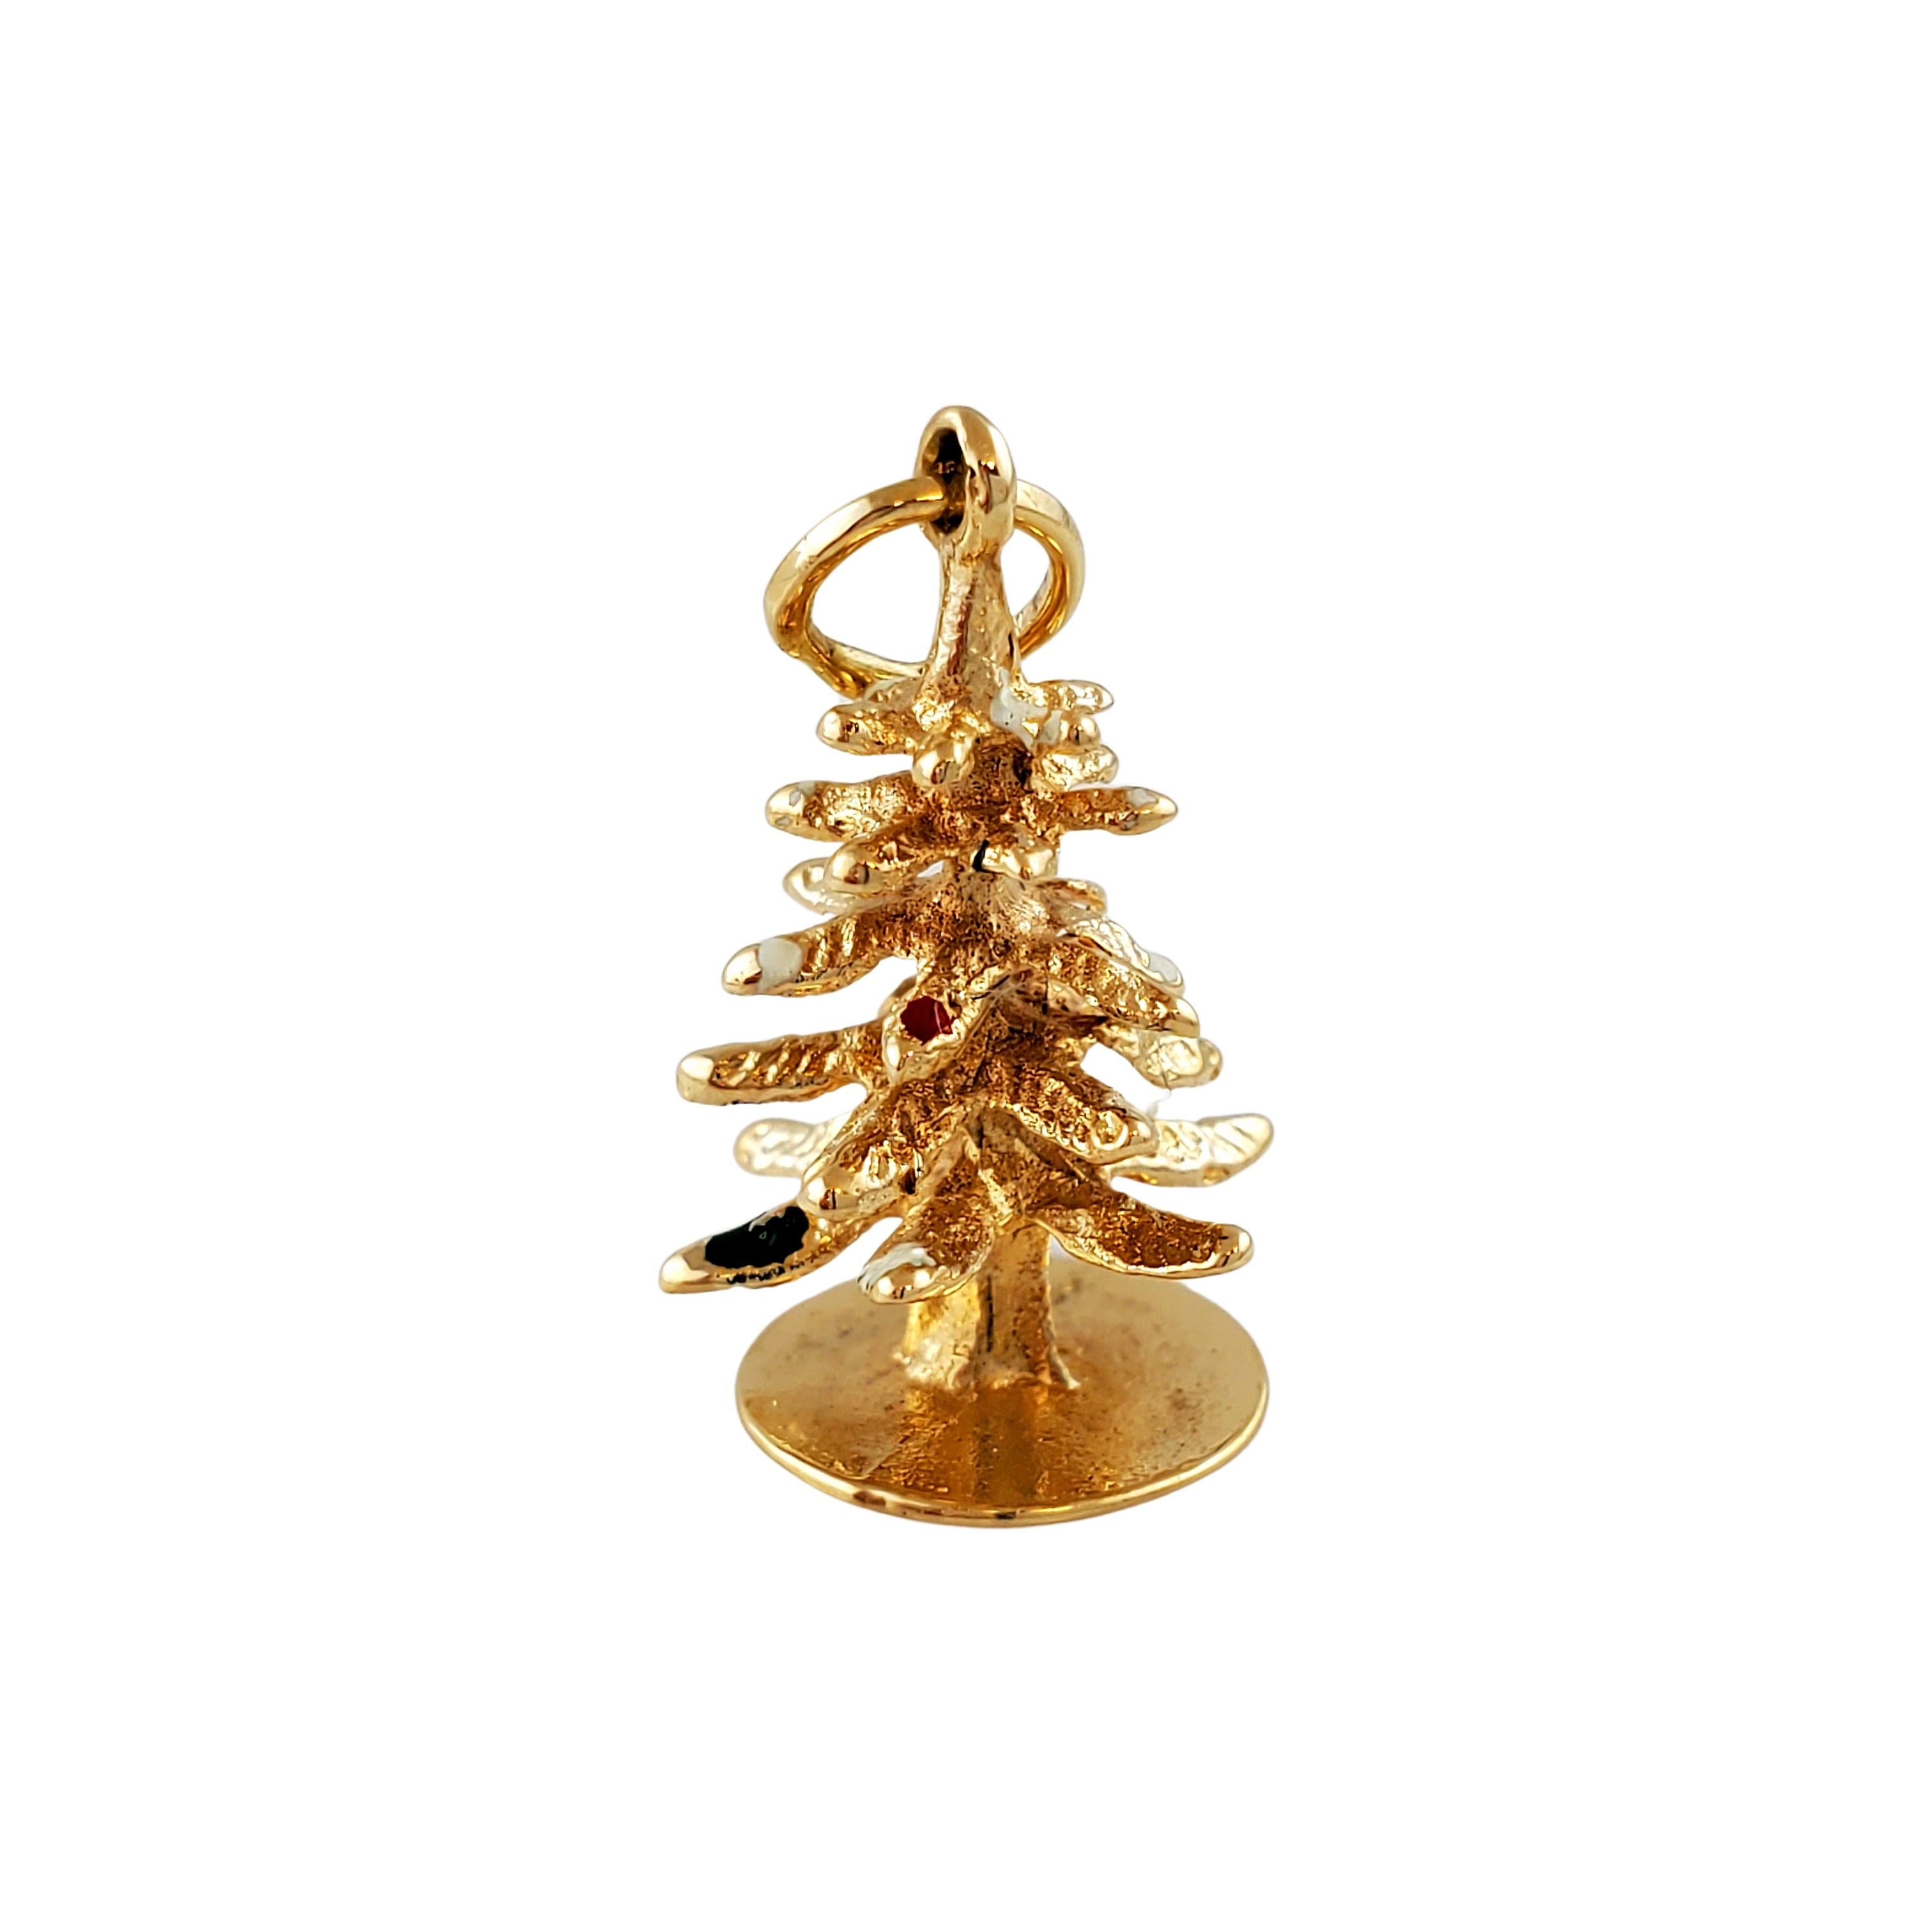 14K Yellow Gold Christmas Tree Charm Pendent

Beautiful 3D 14K yellow gold Christmas Tree charm has some colorful enamel depicting ornaments, enamel is in fair condition.

Size: 17.5mm X 11mm

Weight: 1.4 gr / 0.9 dwt

Hallmark: 14SK 

Very good